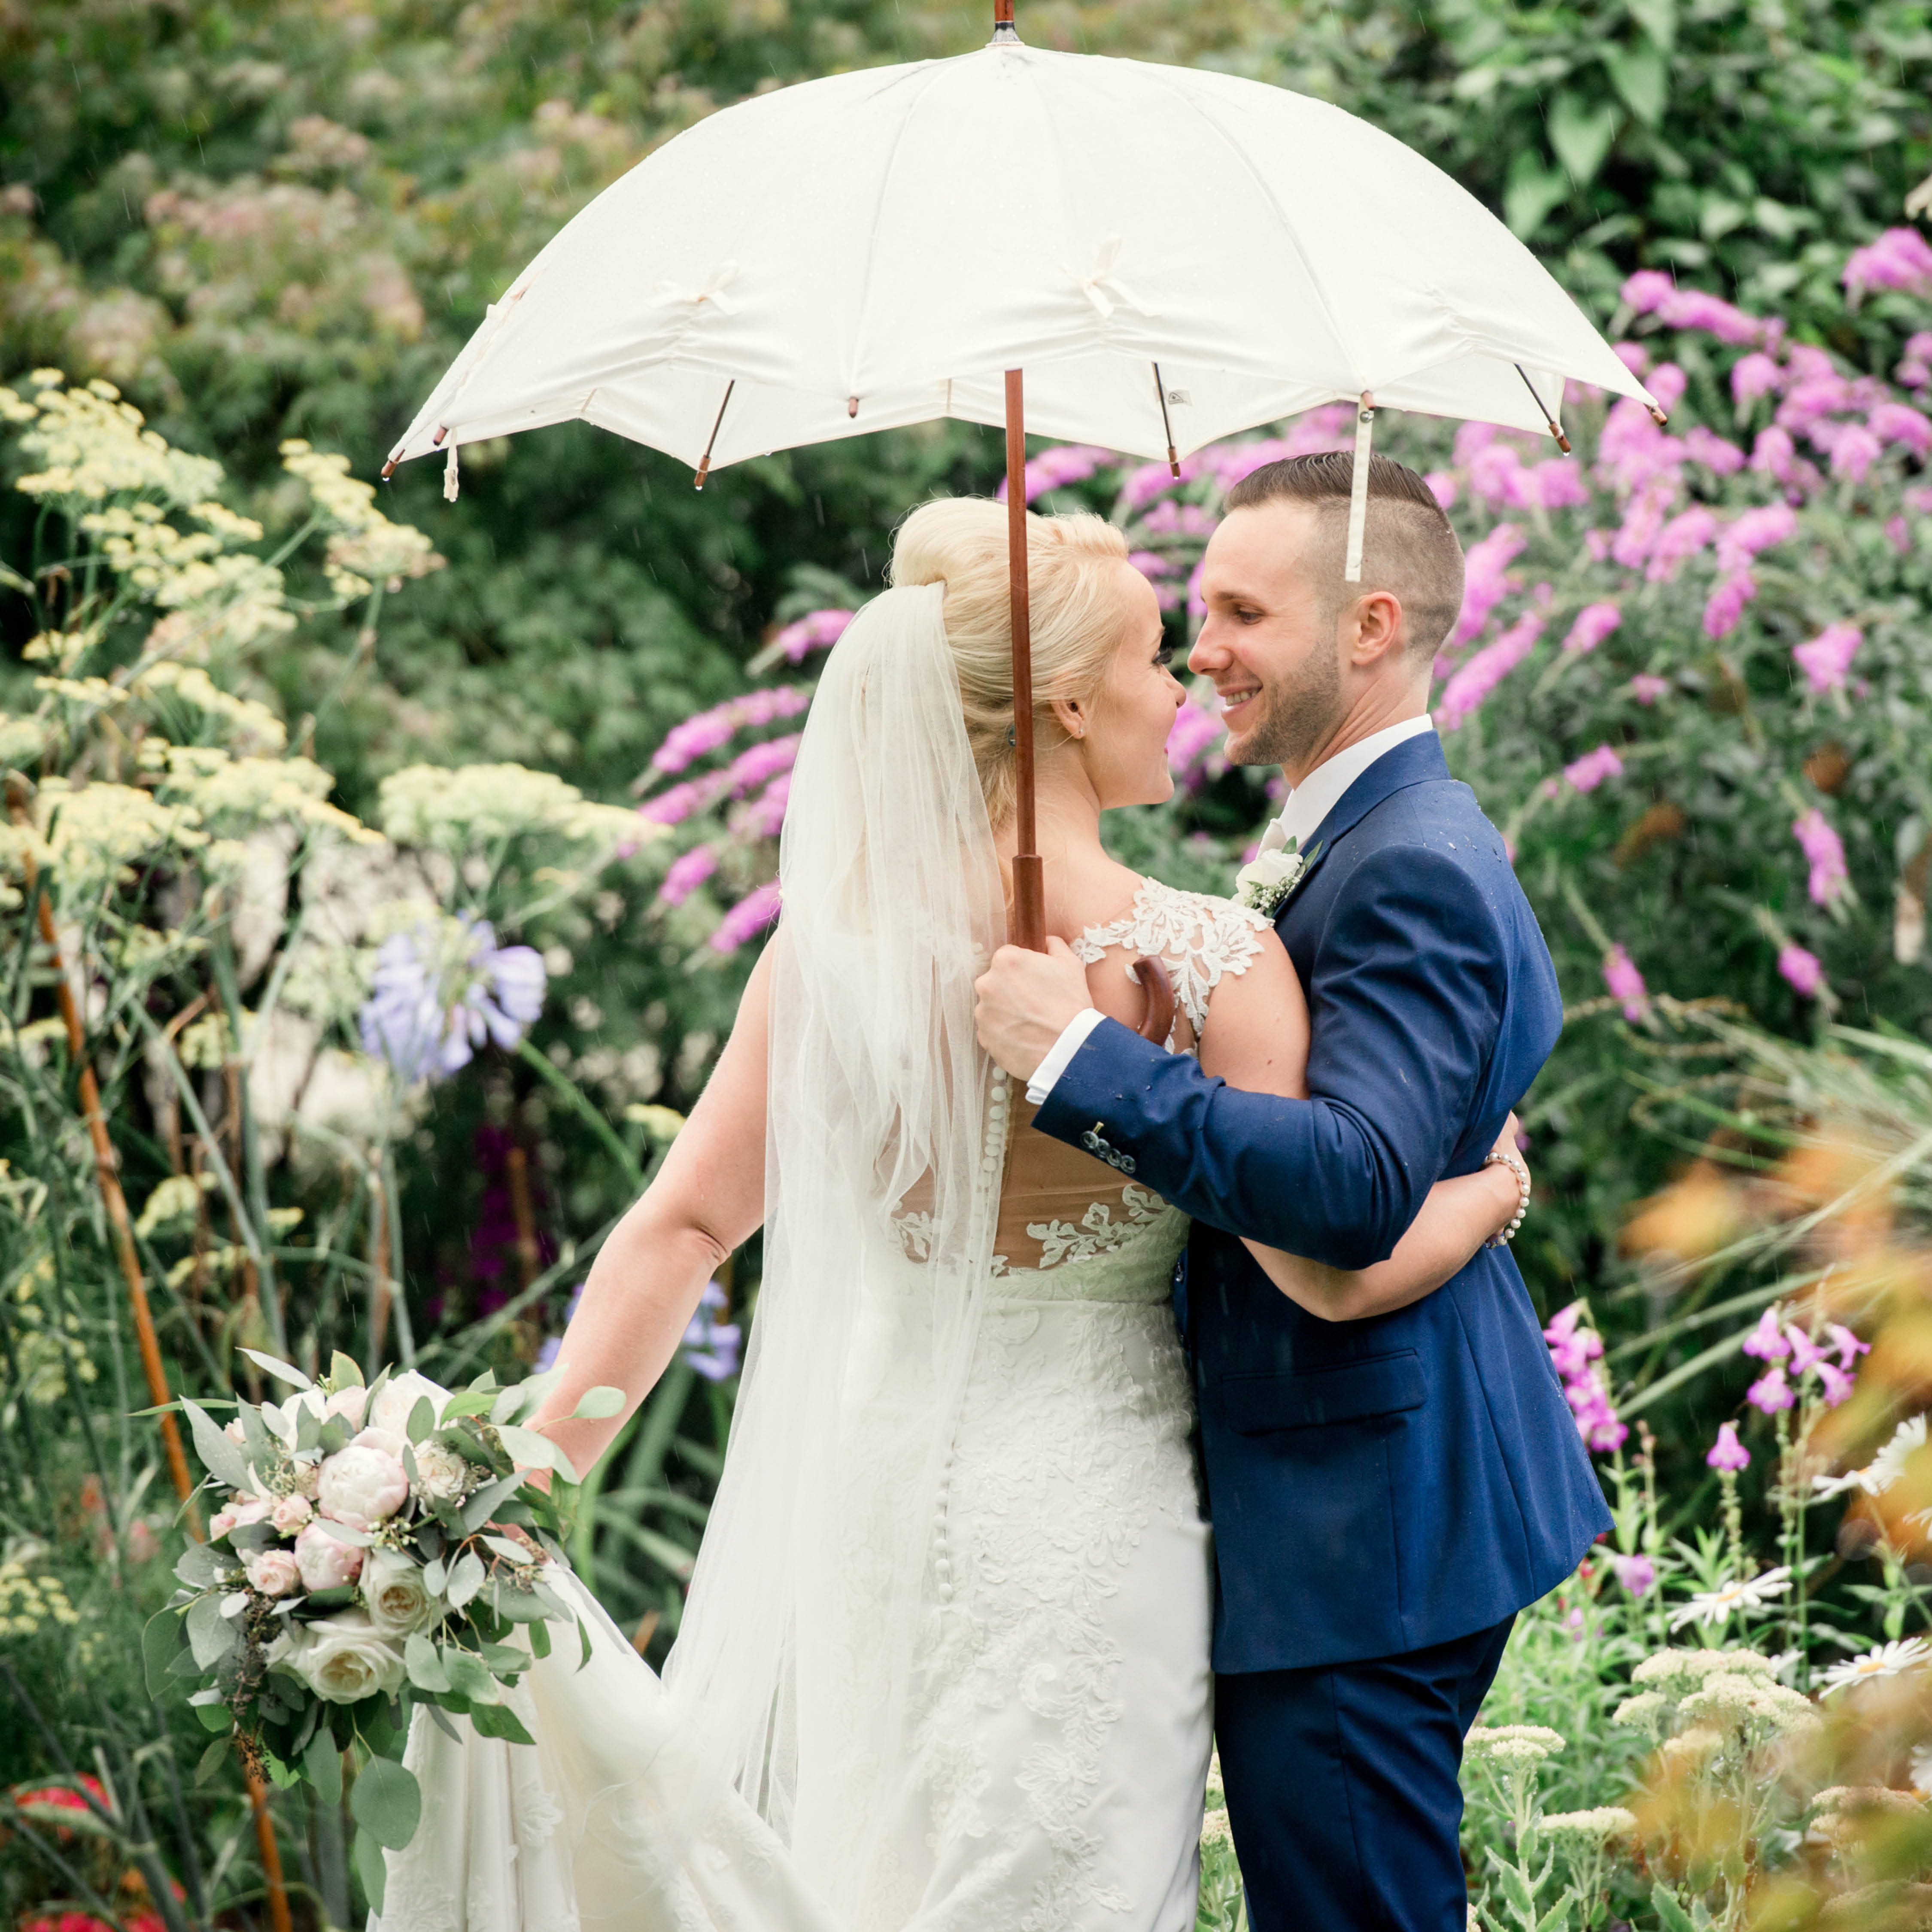 Weather contingency plans for outdoor weddings